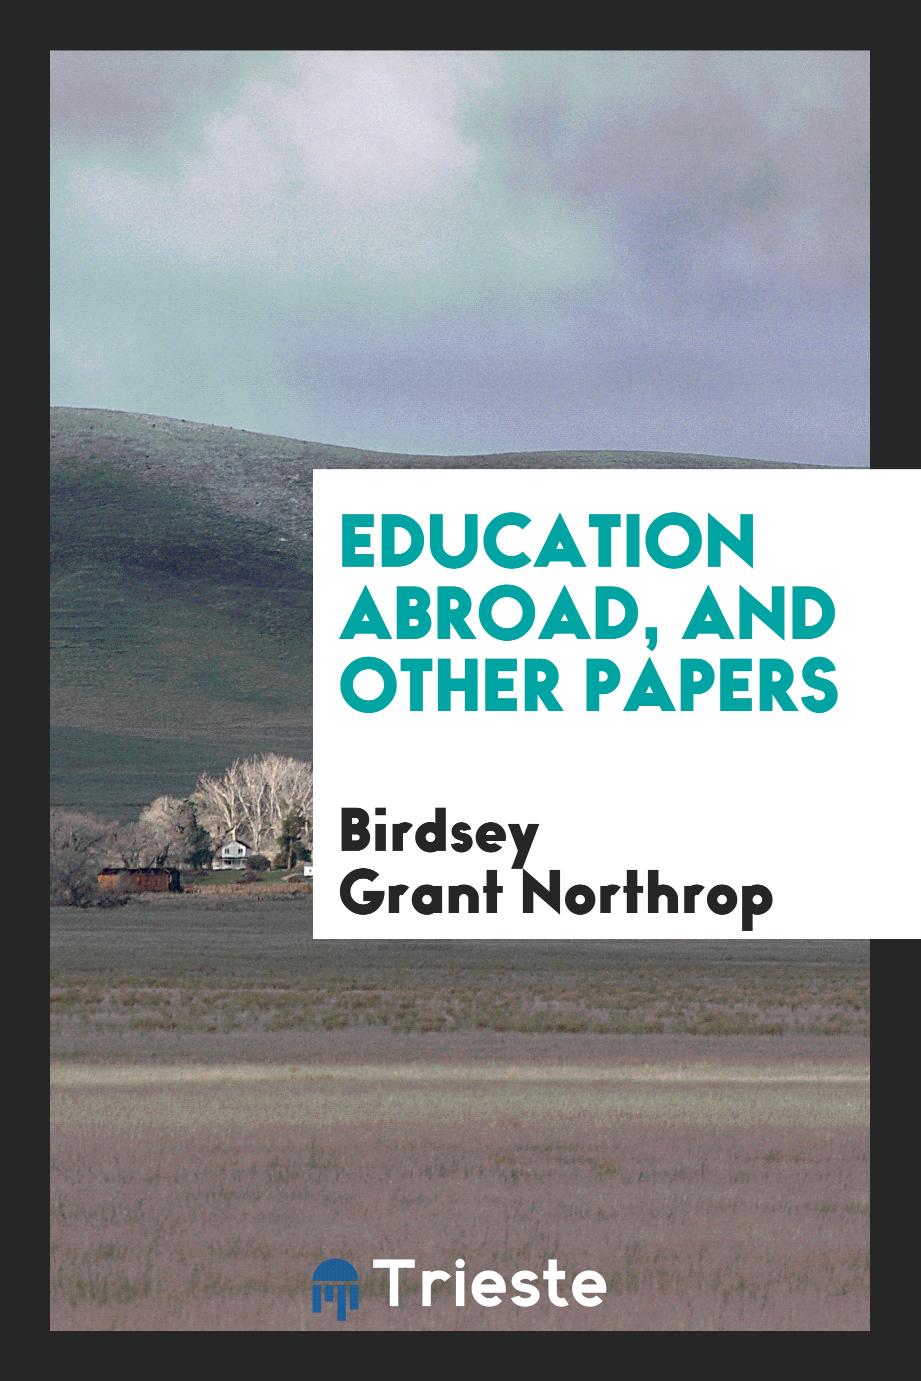 Birdsey Grant Northrop - Education Abroad, and Other Papers